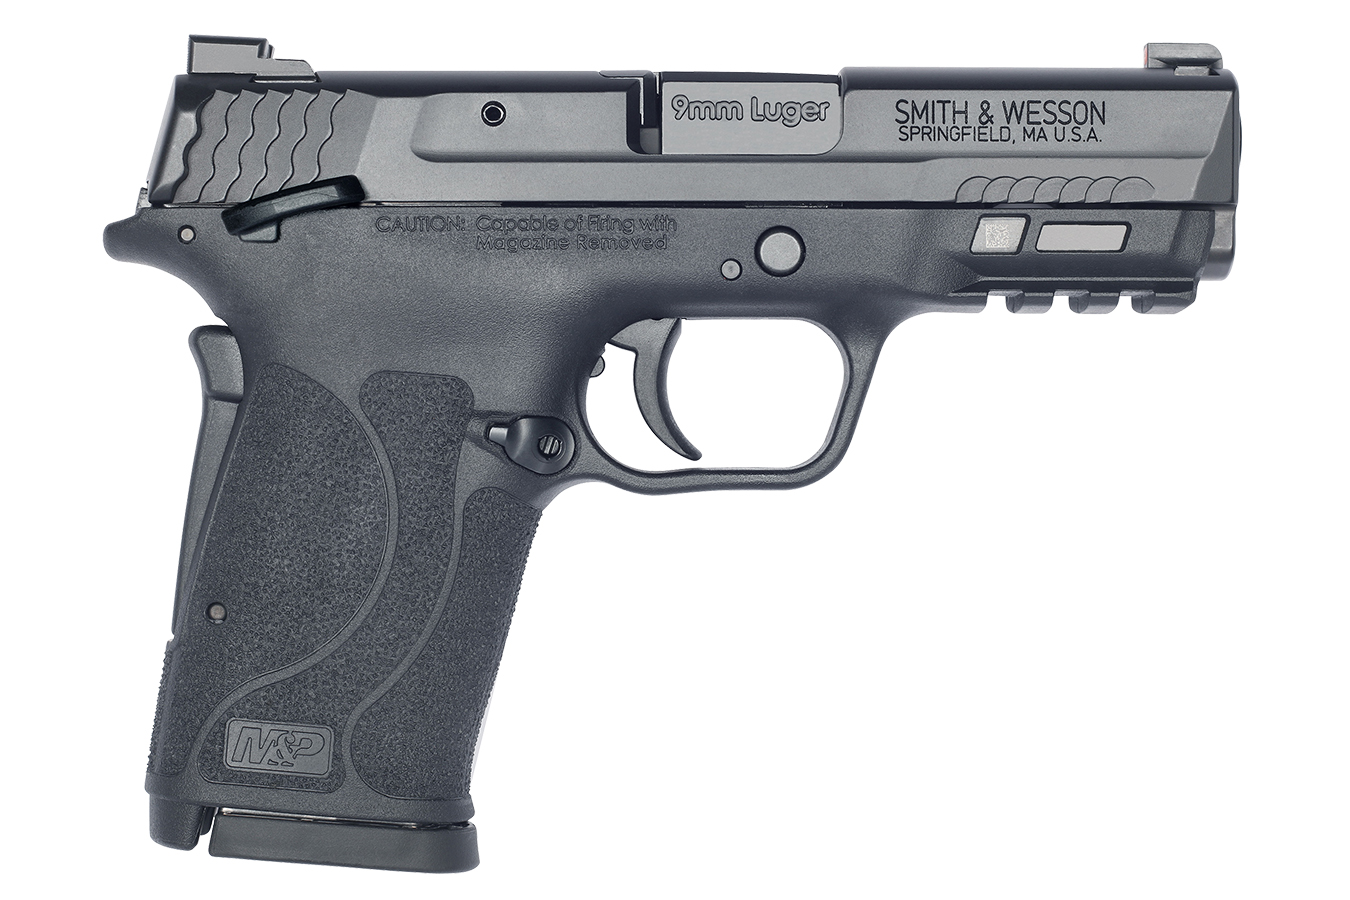 SMITH AND WESSON MP9 SHIELD EZ M2.0 9MM PISTOL WITH TRUGLO NIGHT SIGHTS